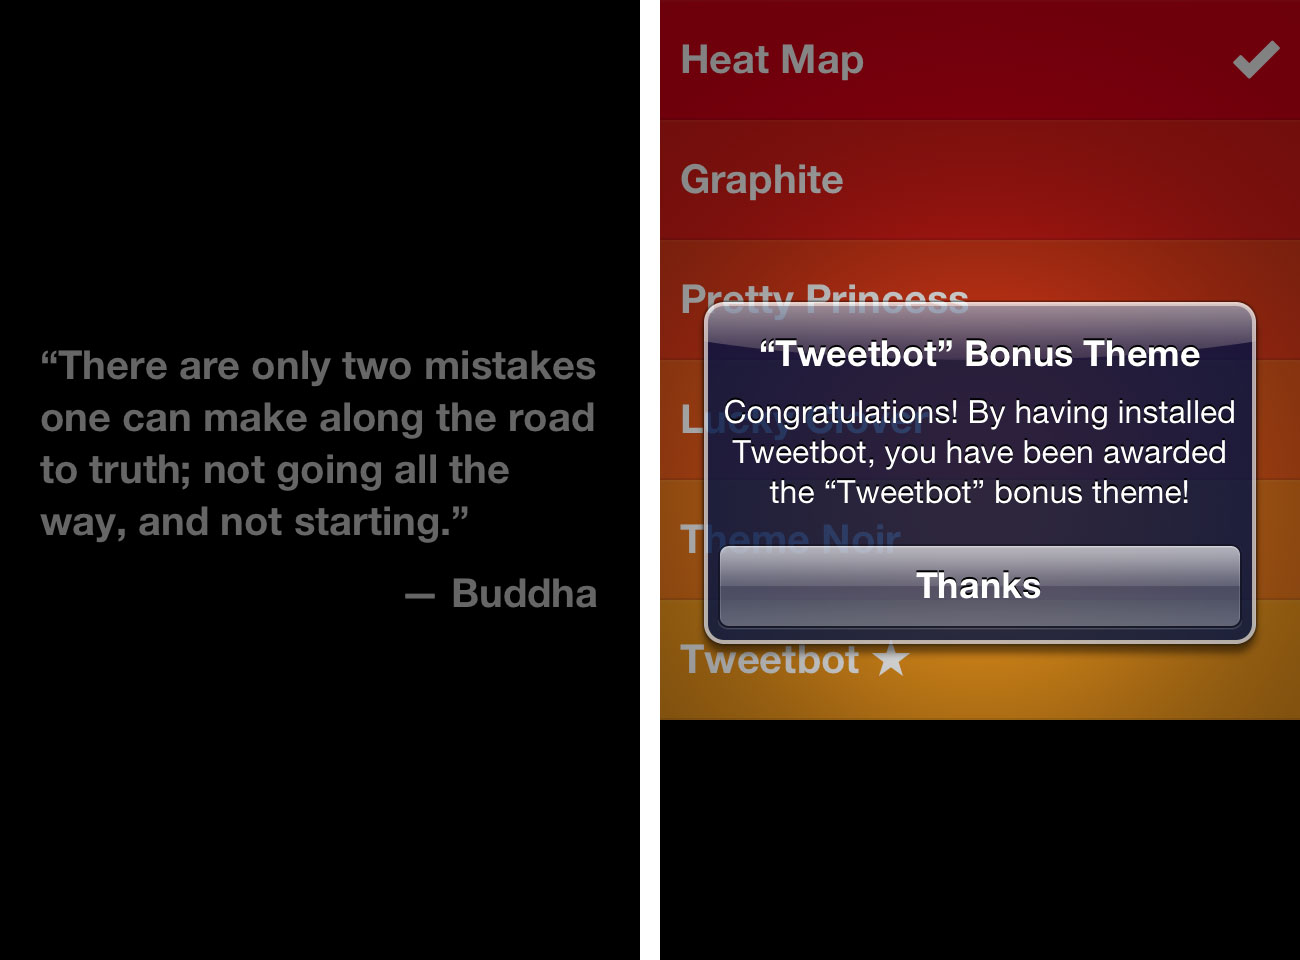 Thoughtful touches abound in Clear, including quotes to fill empty spaces, and bonus themes triggered by other apps